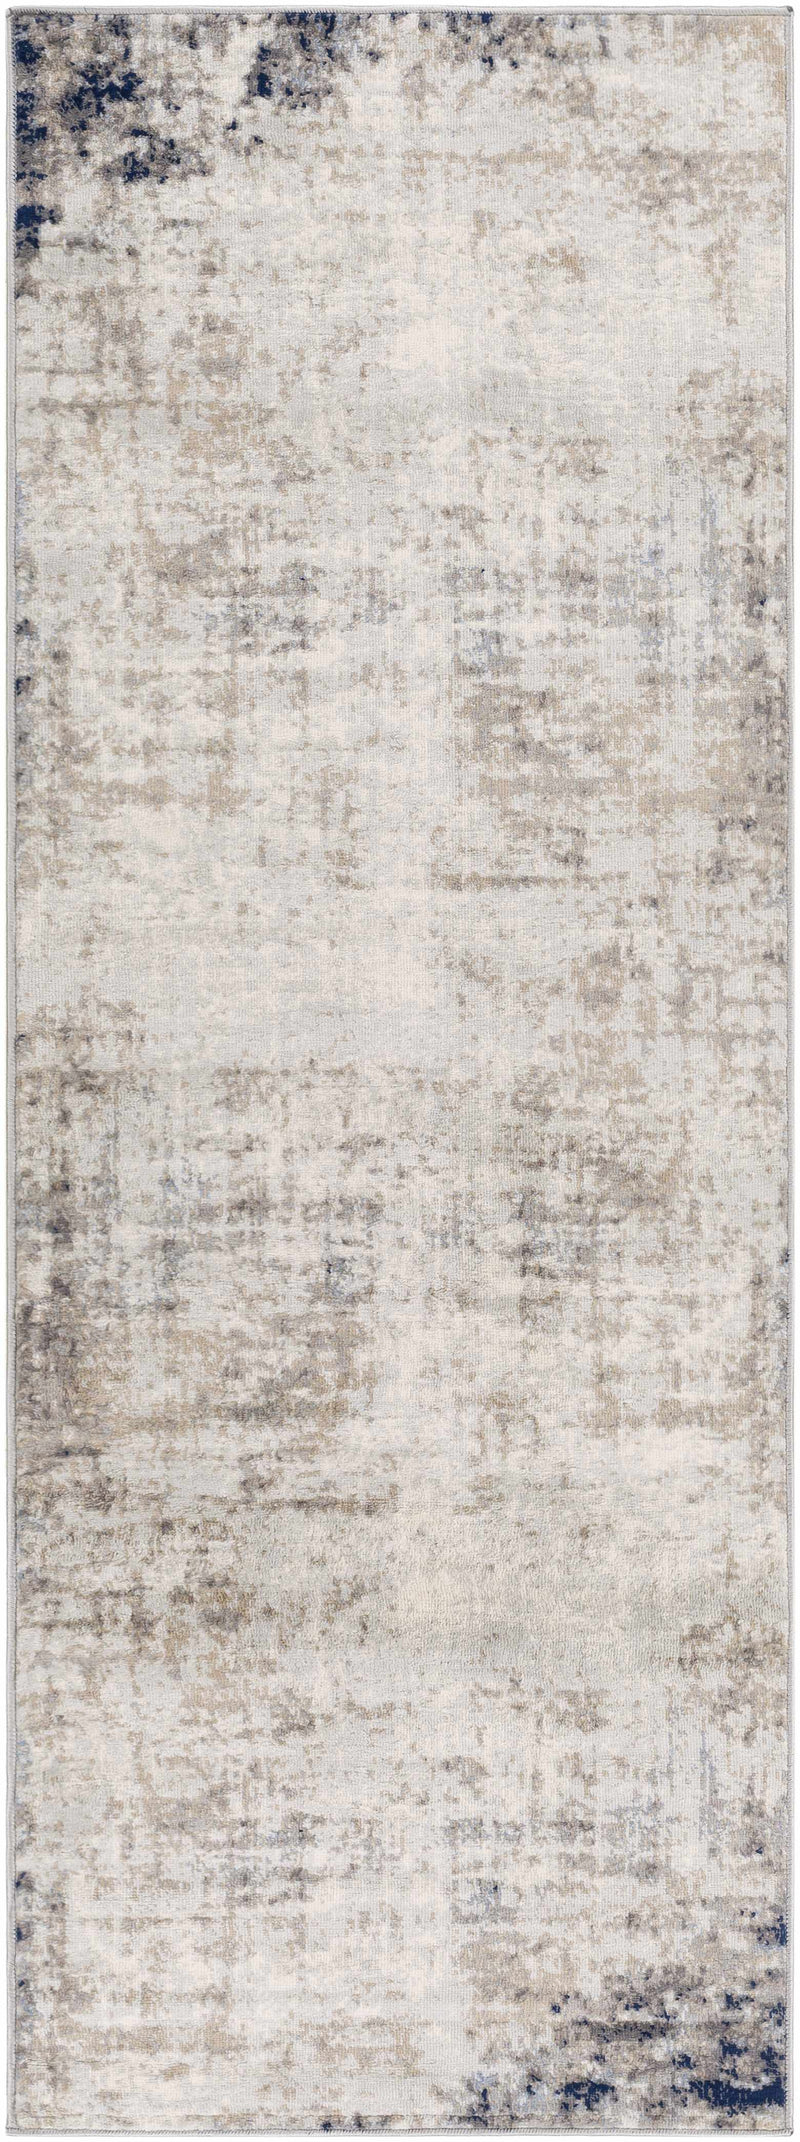 Alcove Abstract Area Rug Rugs Boutique Rugs 2'7" x 7'3" Runner 